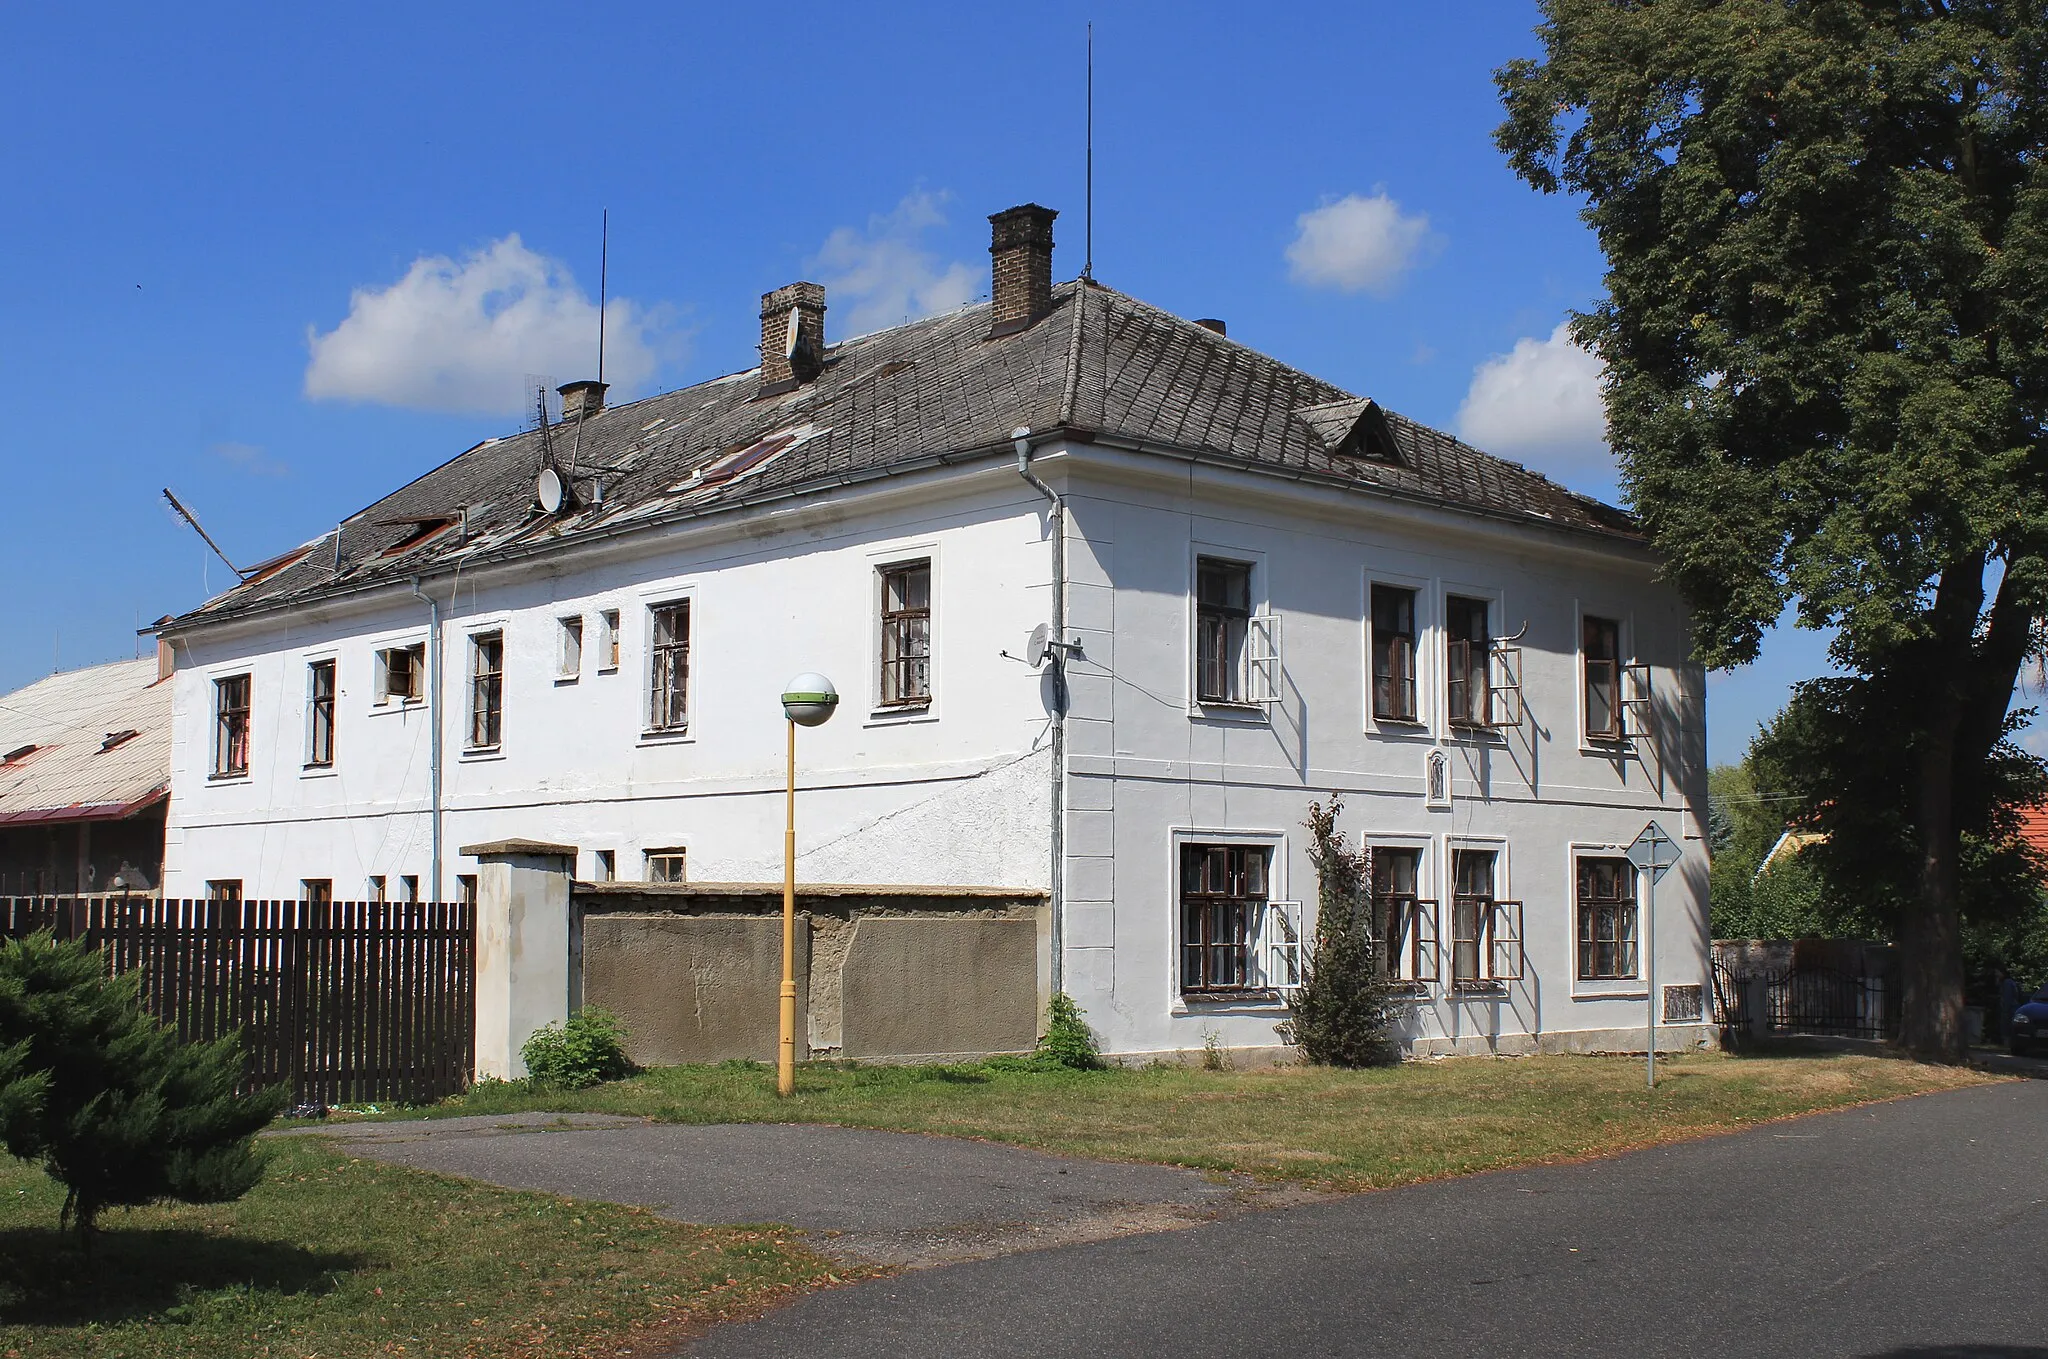 Photo showing: Administrative house of old brewery in Dymokury, Czech Republic.